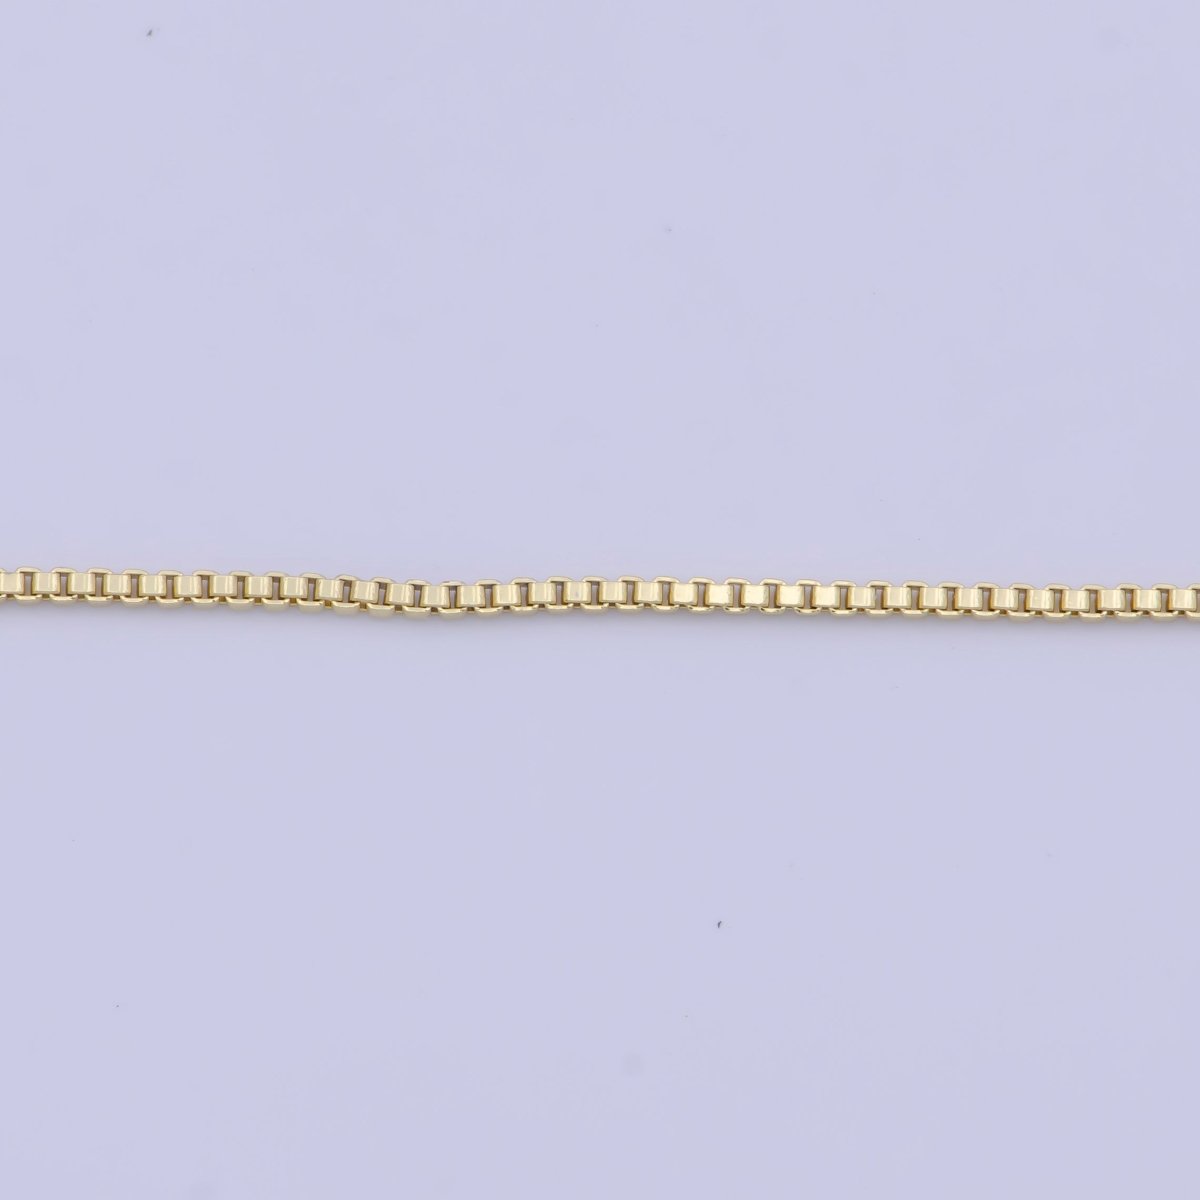 Dainty Box Chain 18" Ready to Wear 14k Gold Filled Box Chain with Lobster Clasp, Simple Everyday Layering Necklace | WA-1115 Clearance Pricing - DLUXCA